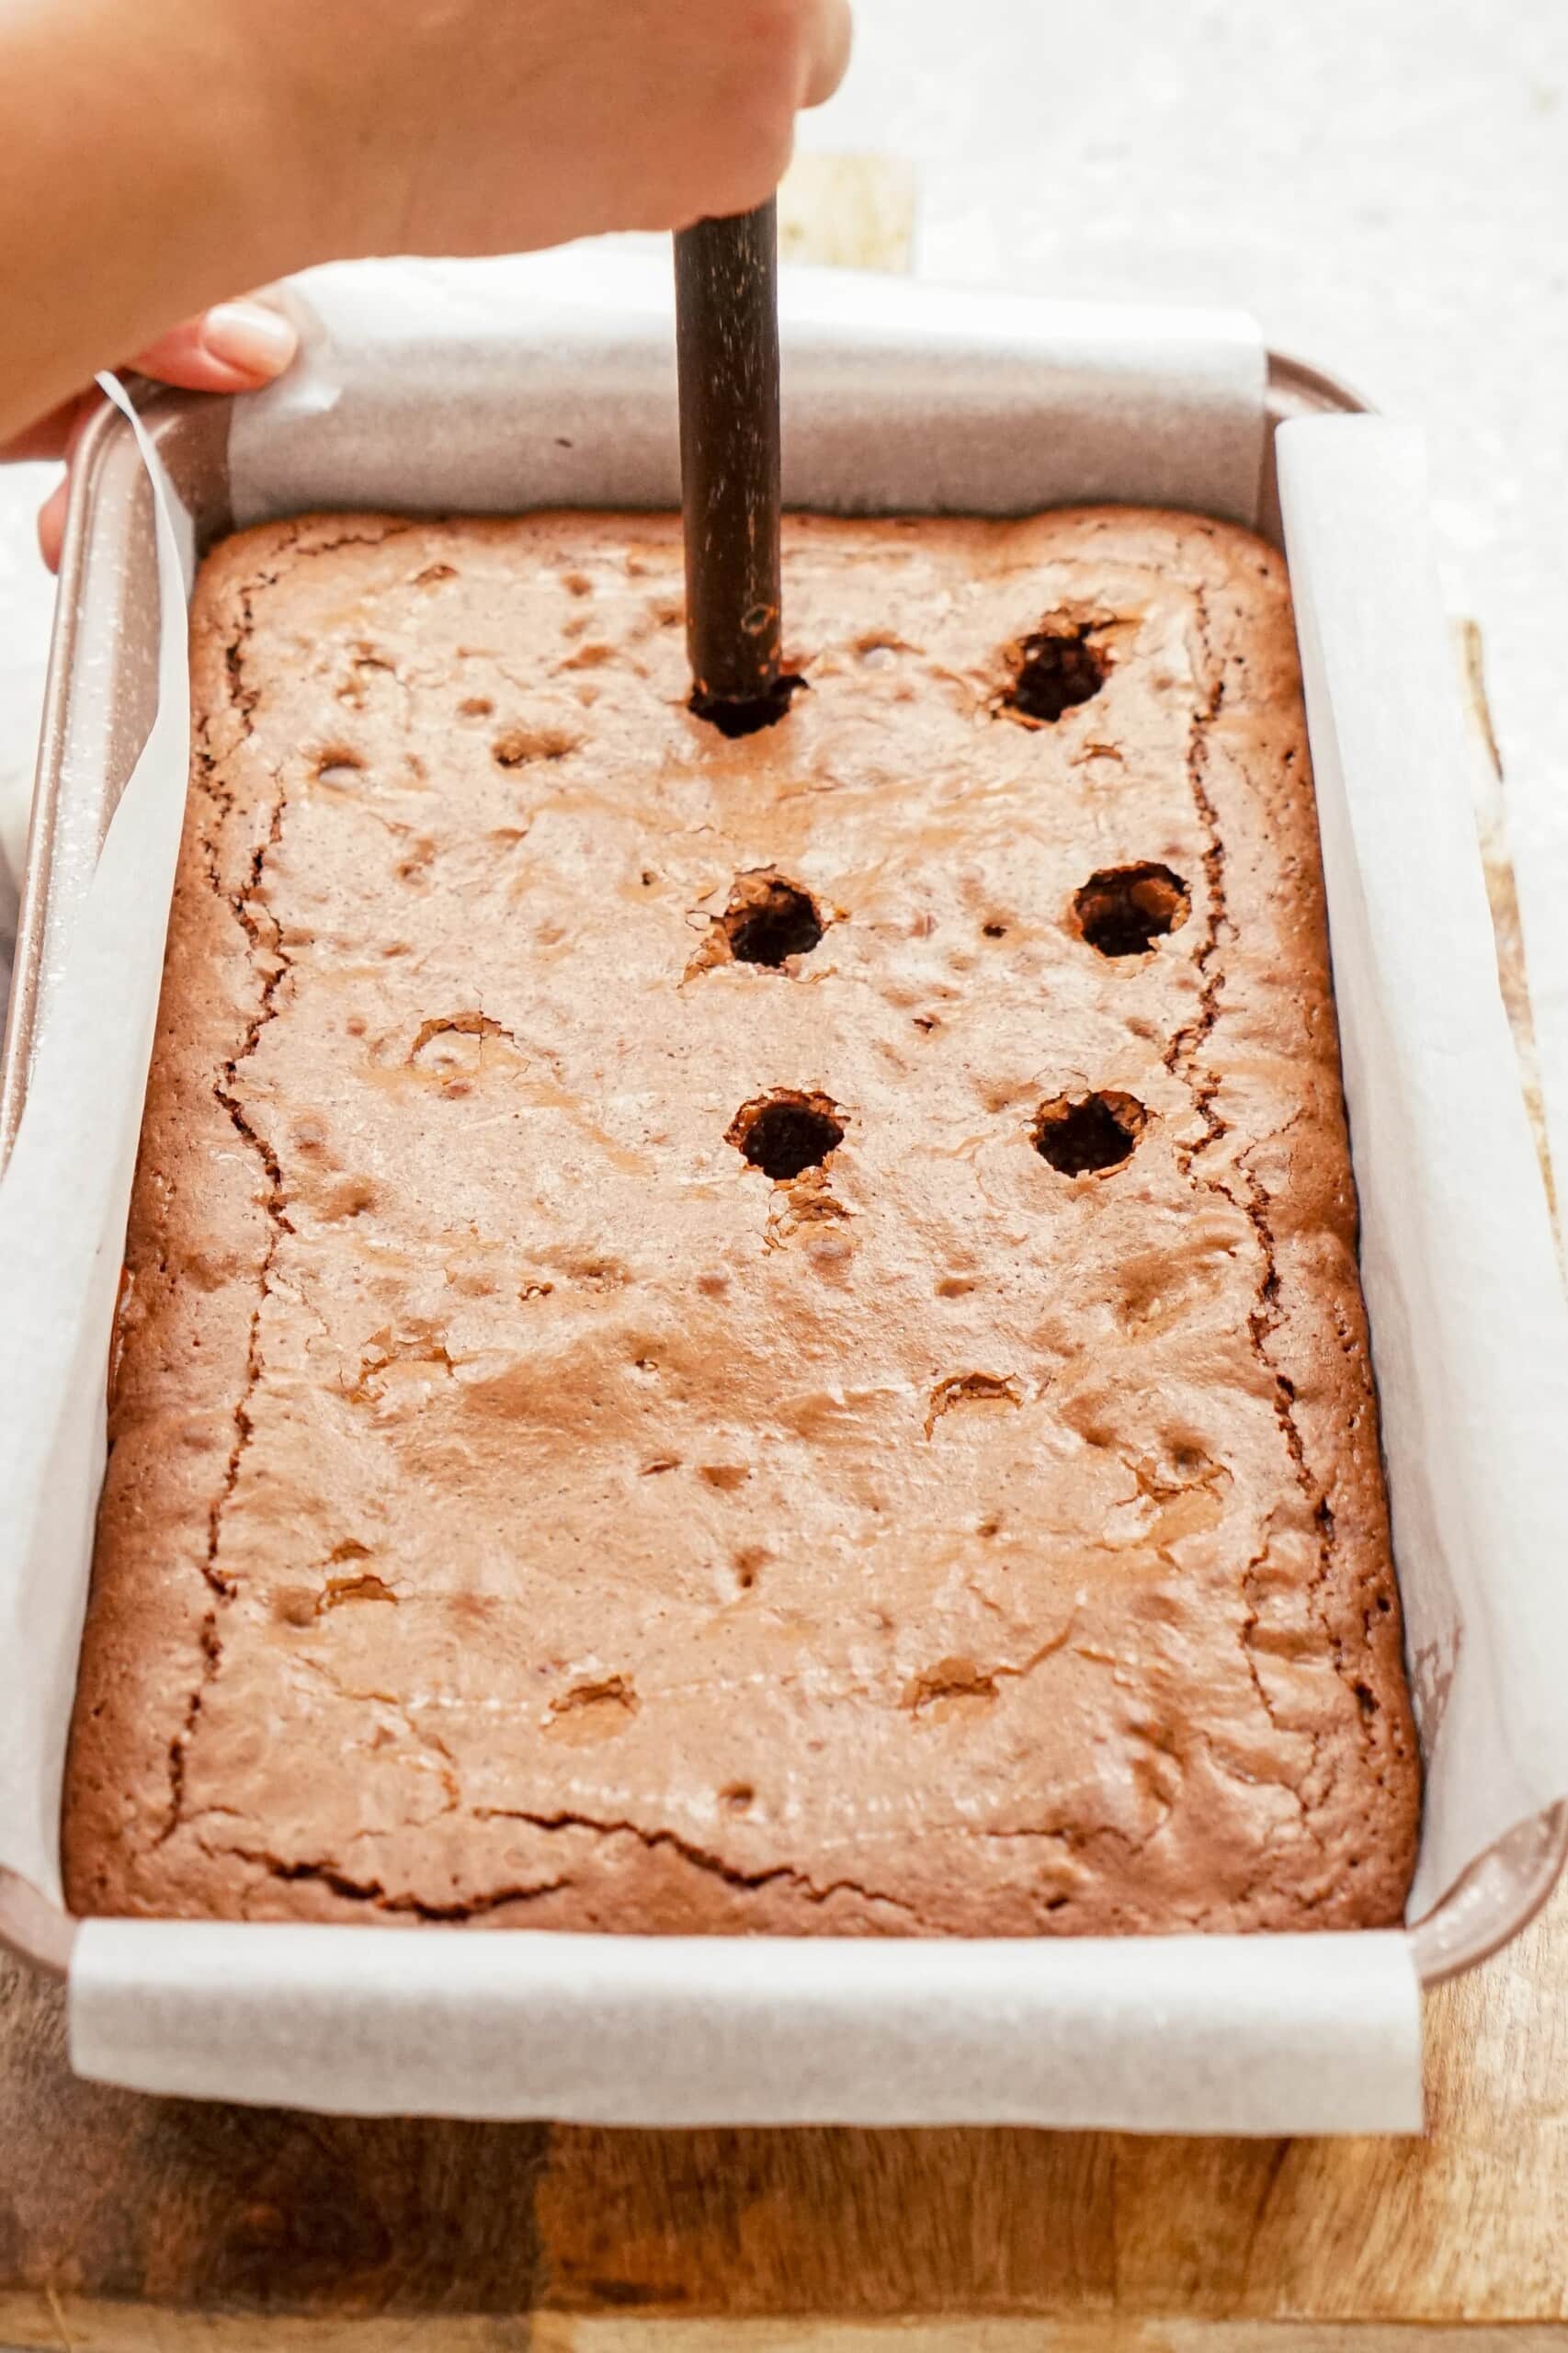 poking holes into brownies with the end of a wooden spoon